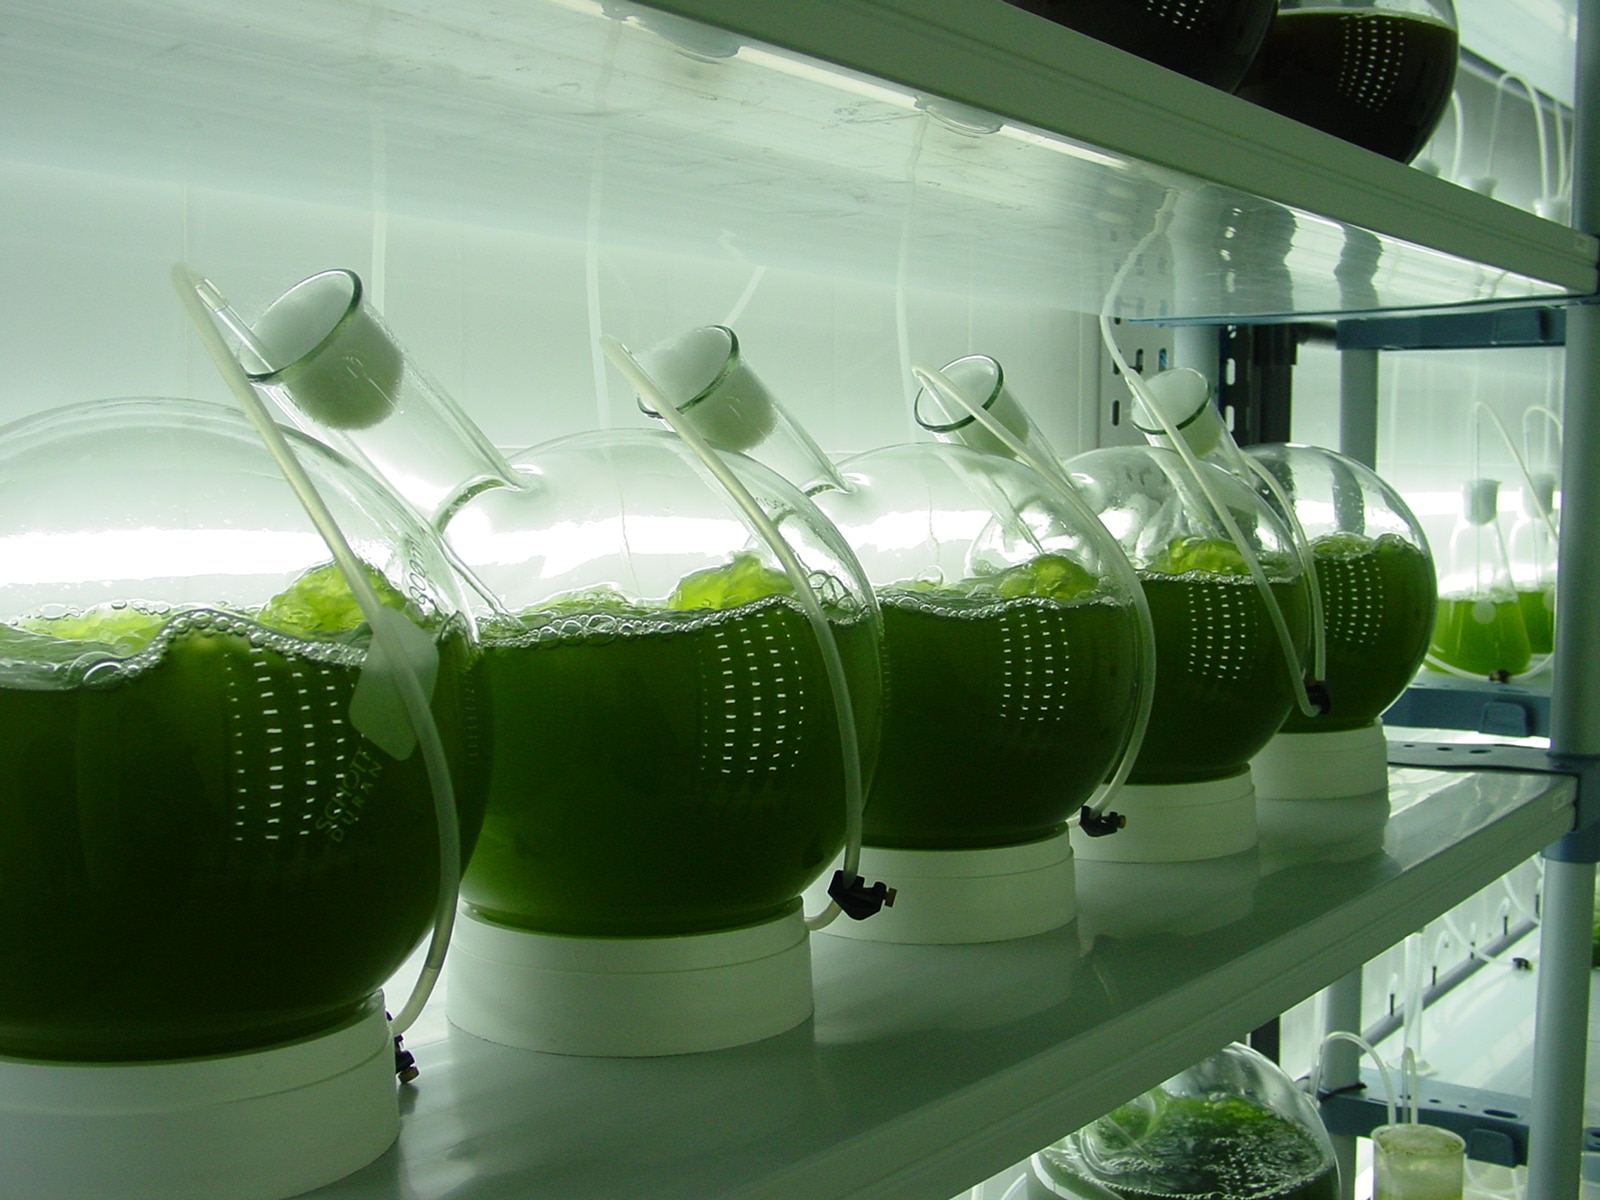 Cultivation of Algea in Laboratories